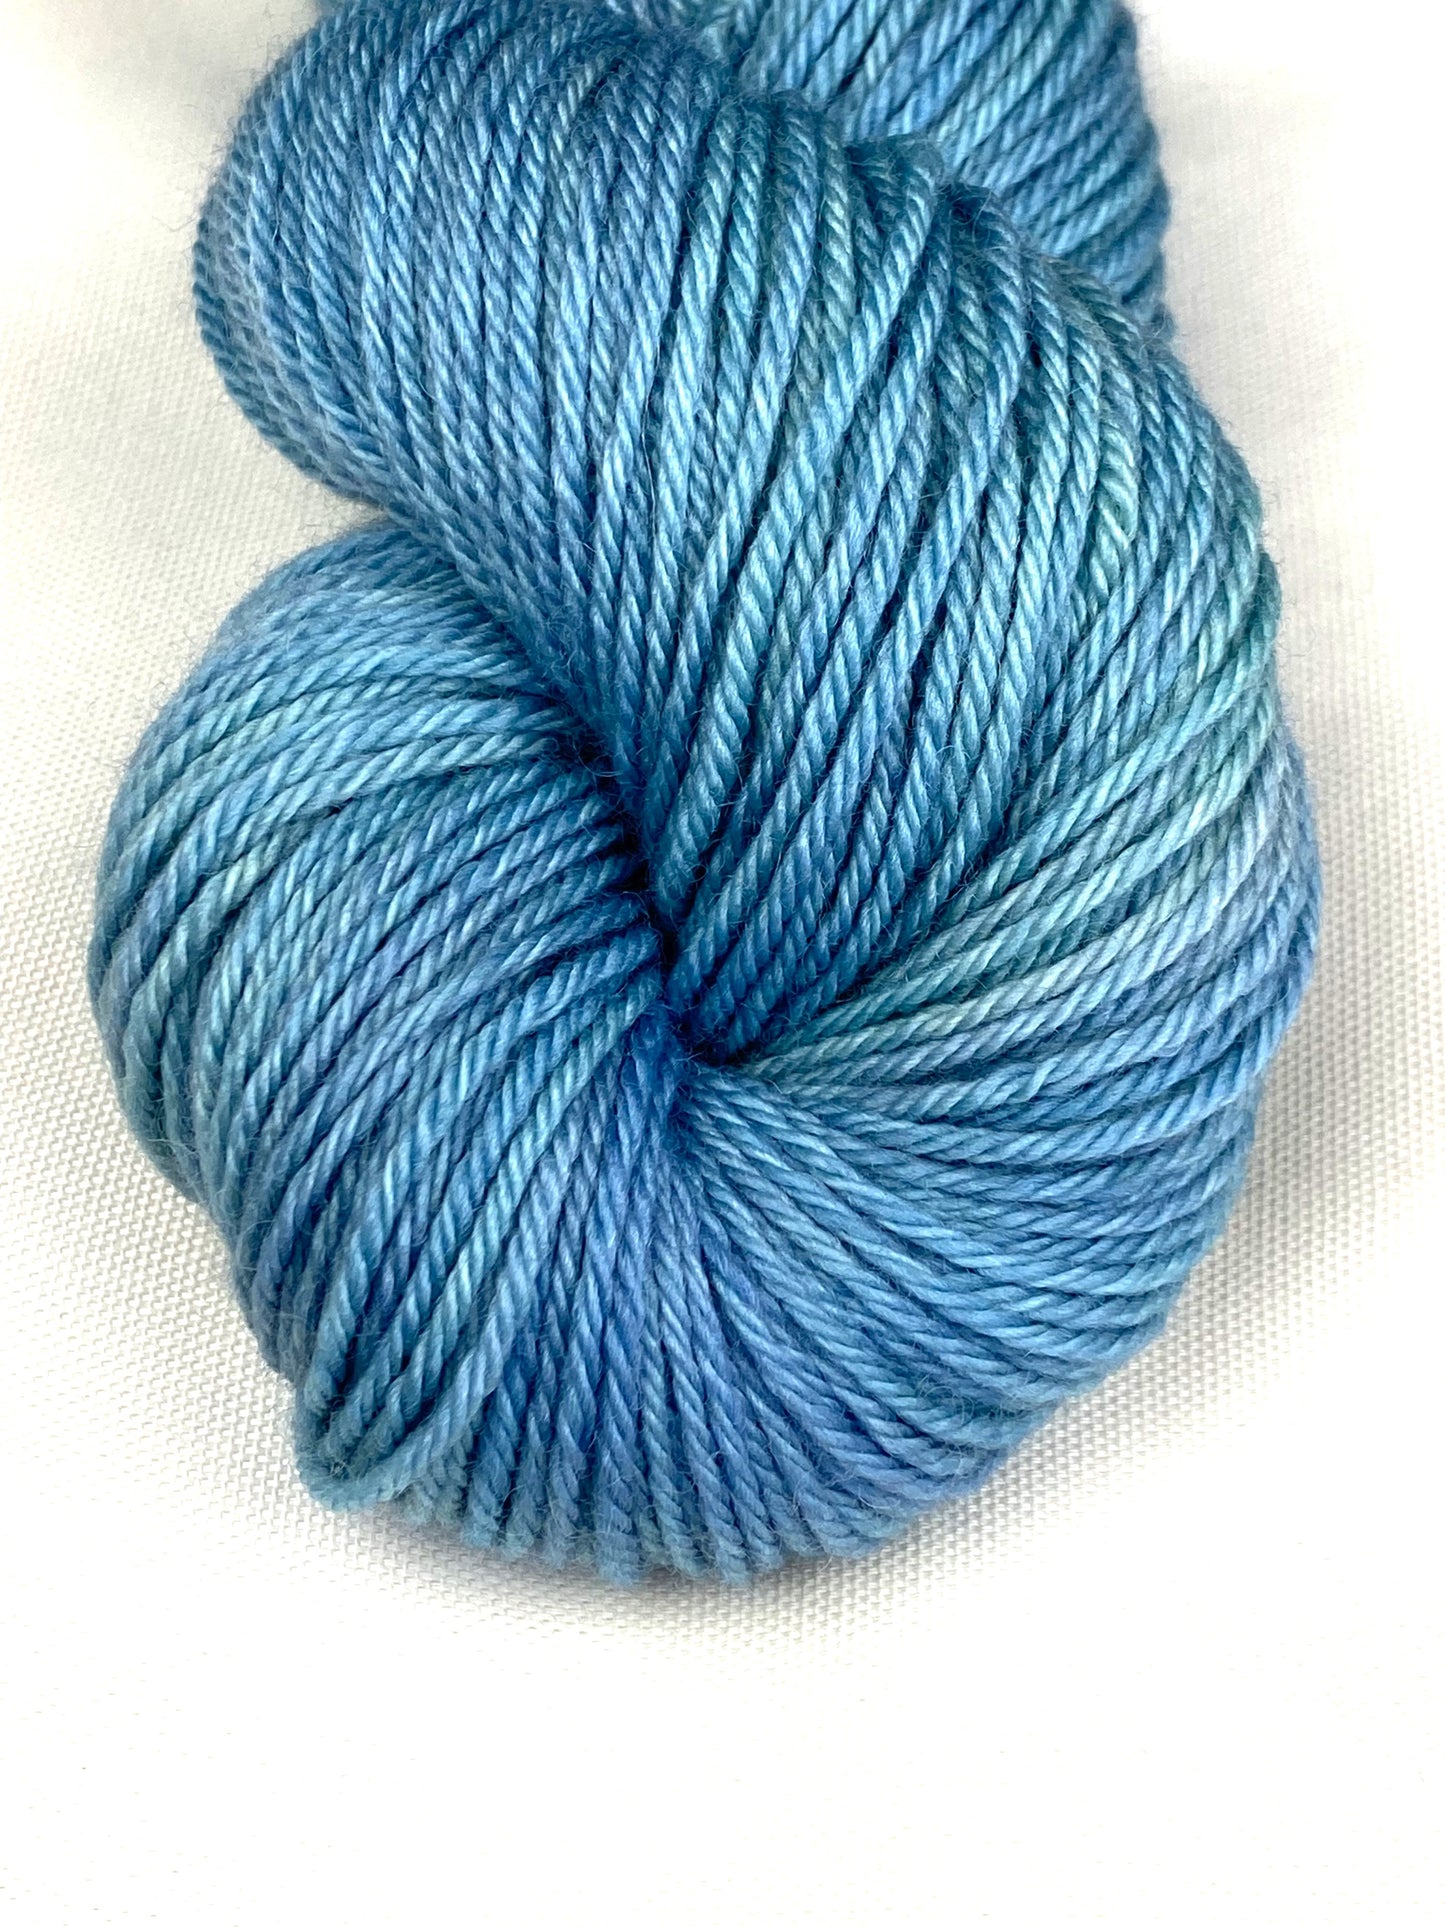 Winter Pillow Worsted / Mountain Harebell